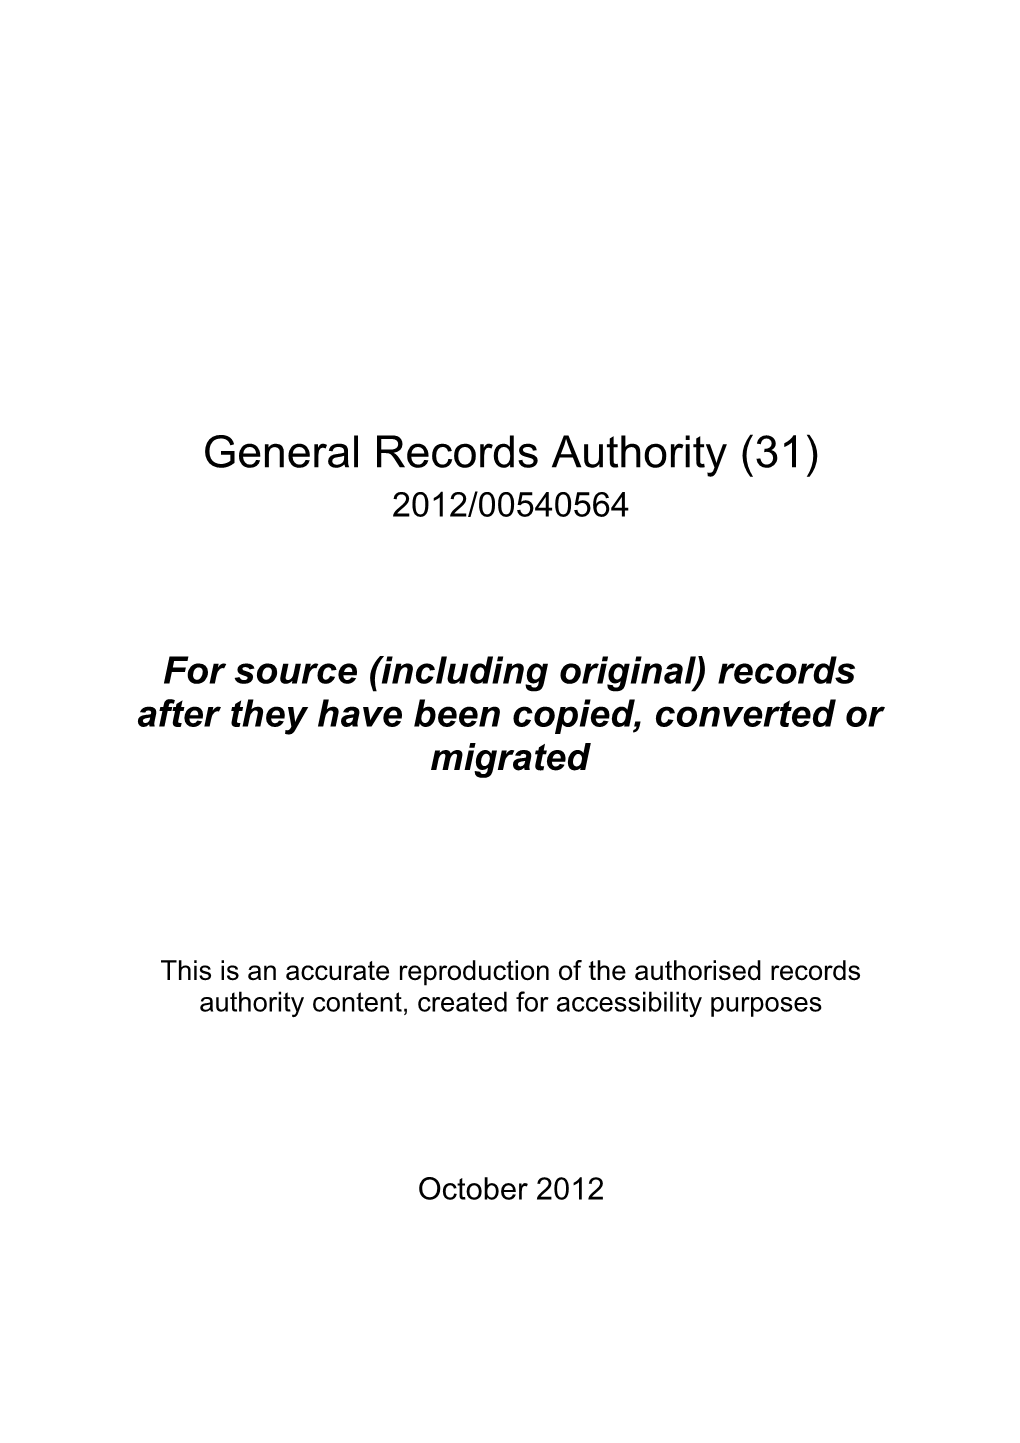 General Records Authority 31 - 2012/00540564 - for Source (Including Original) Records